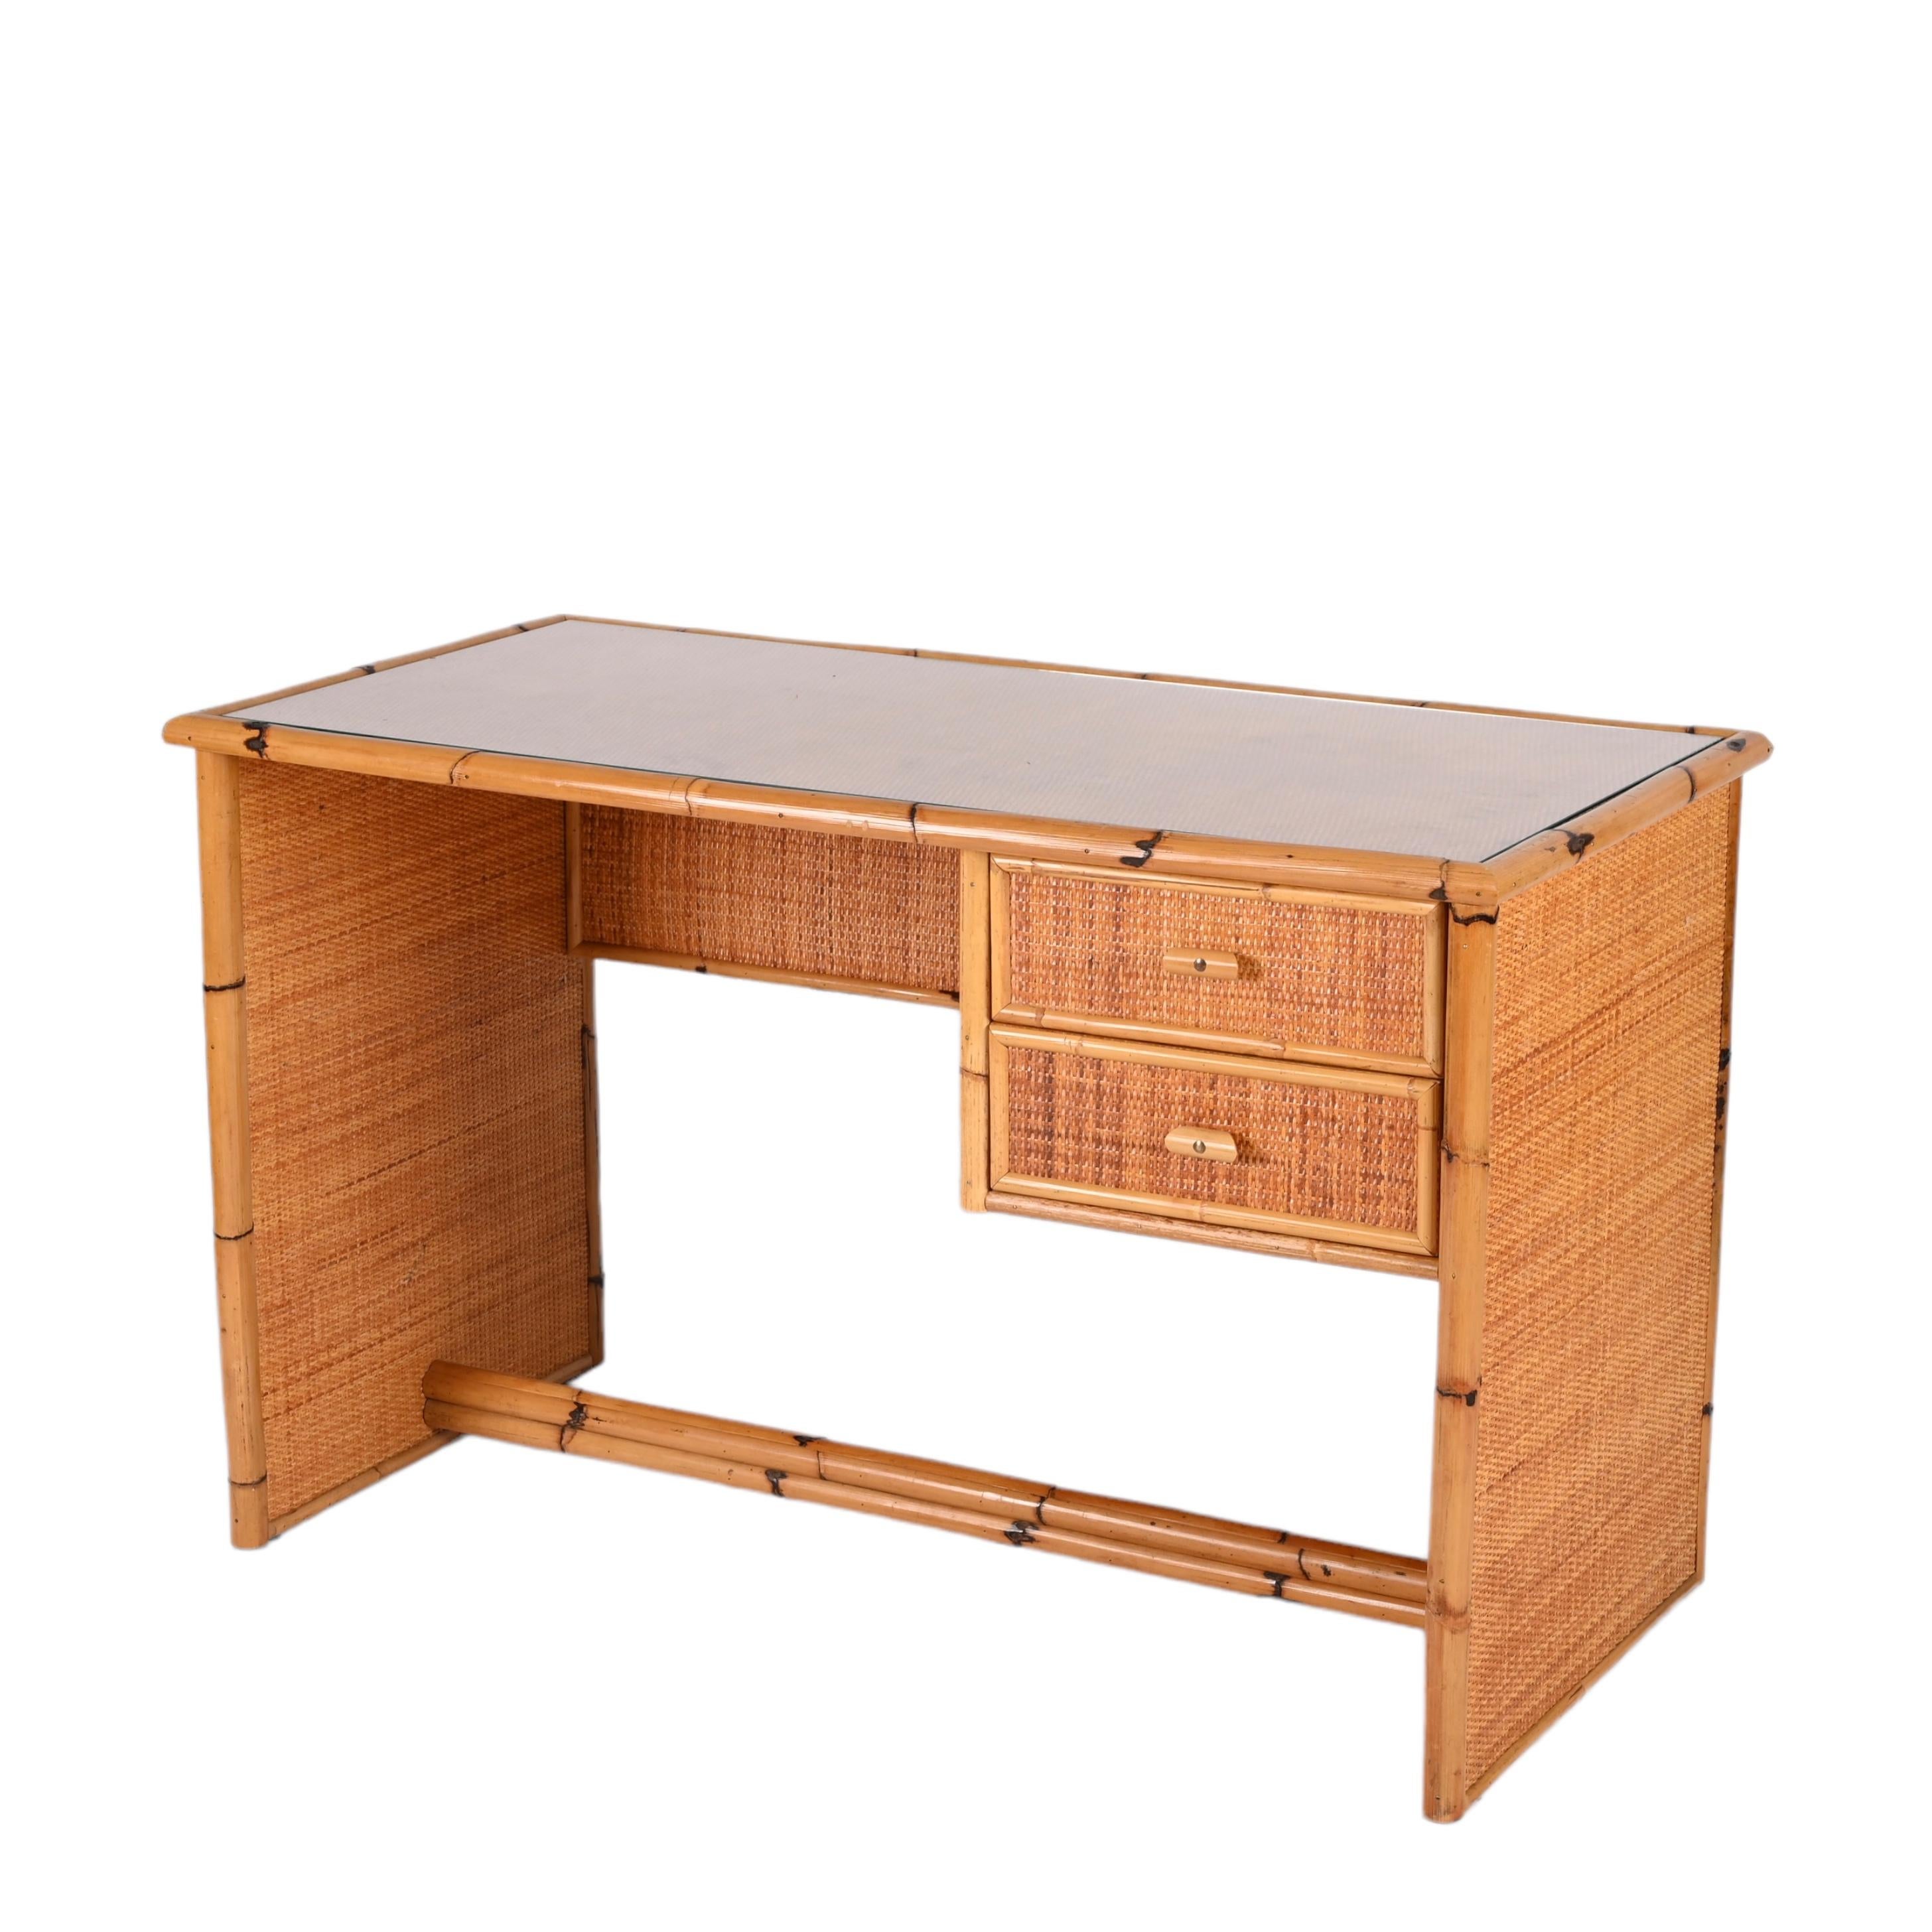 Midcentury Glass Top, Bamboo and Wicker Italian Desk with Drawers, 1980s For Sale 6